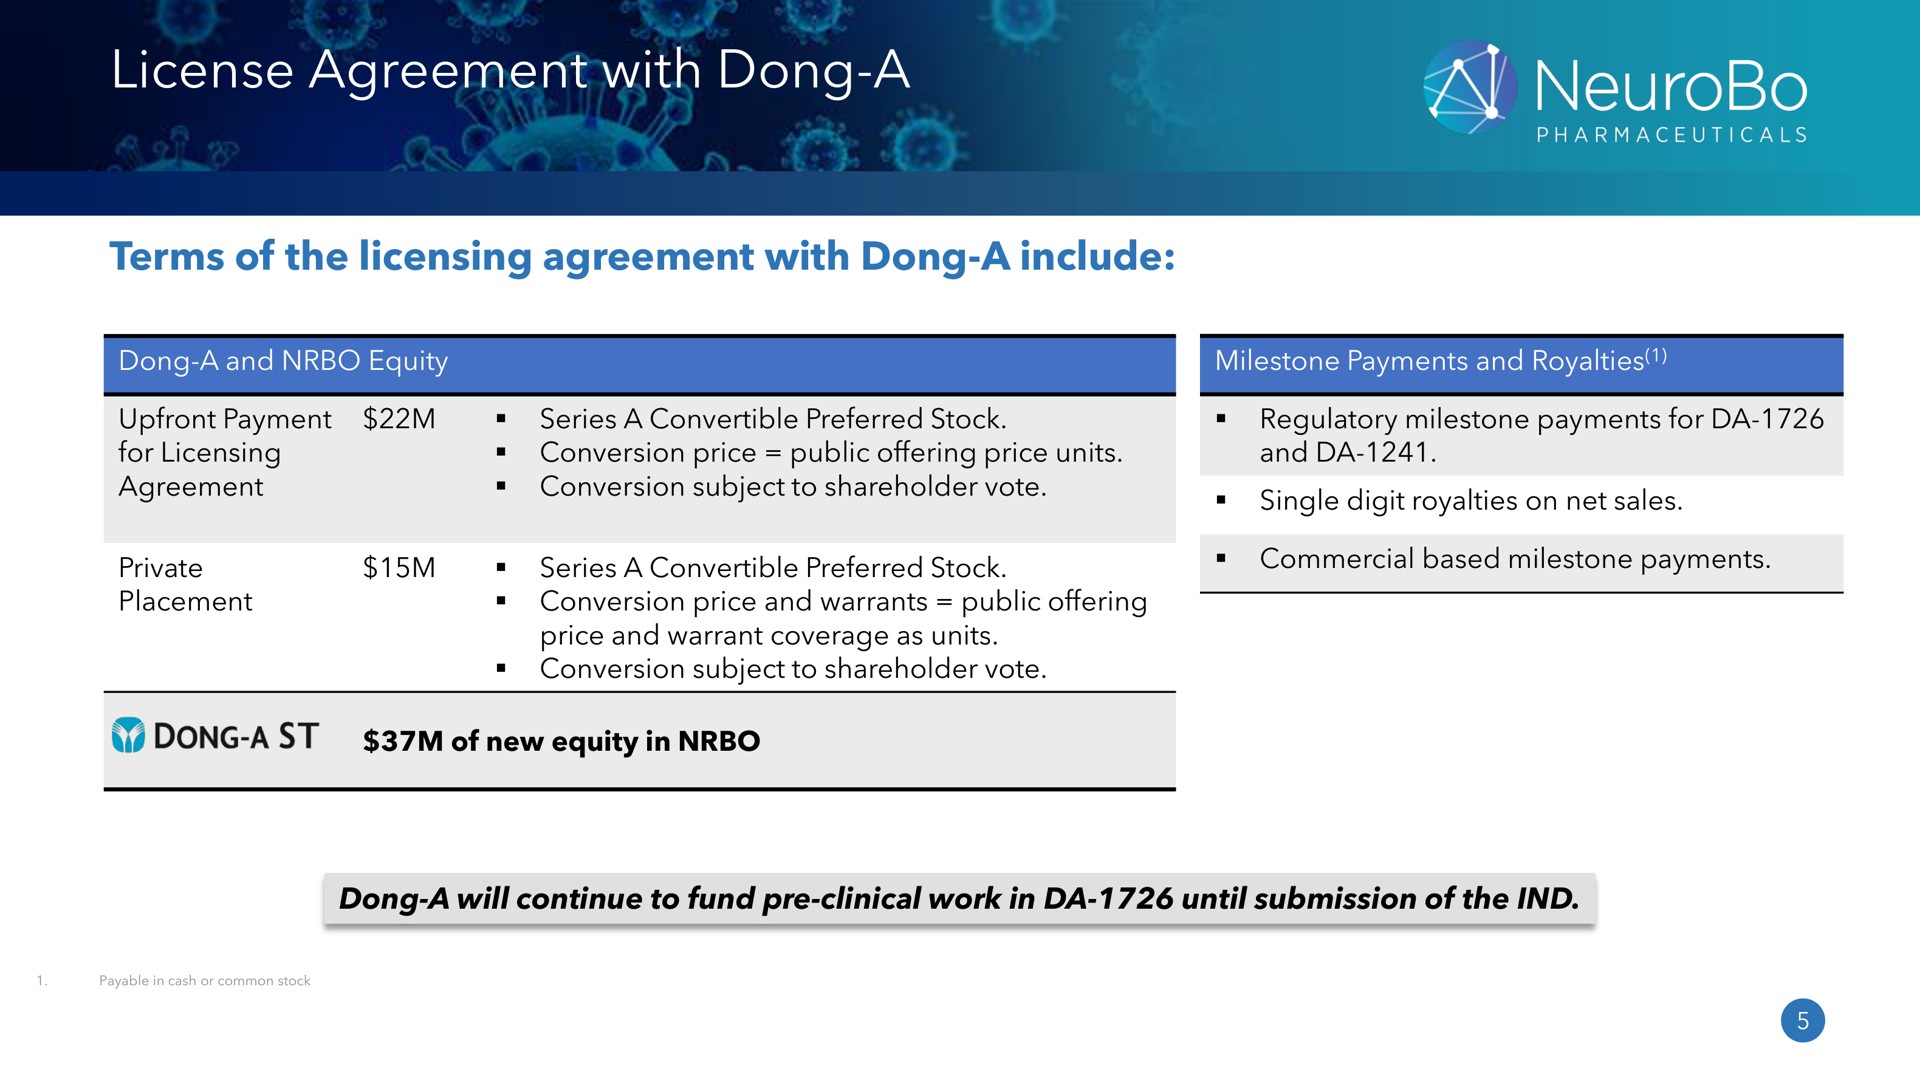 license agreement with dong a | NeuroBo Pharmaceuticals